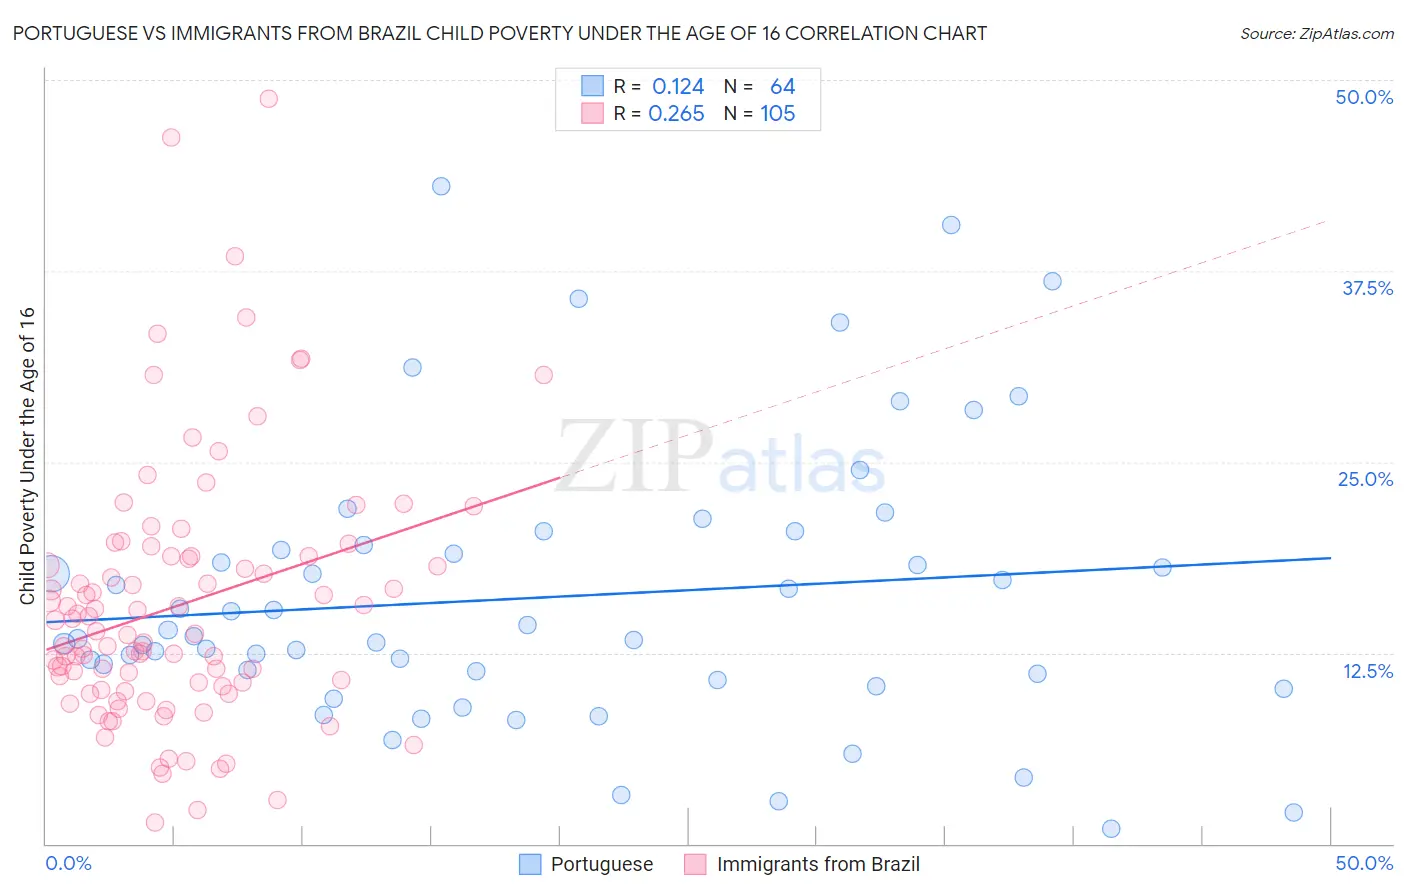 Portuguese vs Immigrants from Brazil Child Poverty Under the Age of 16